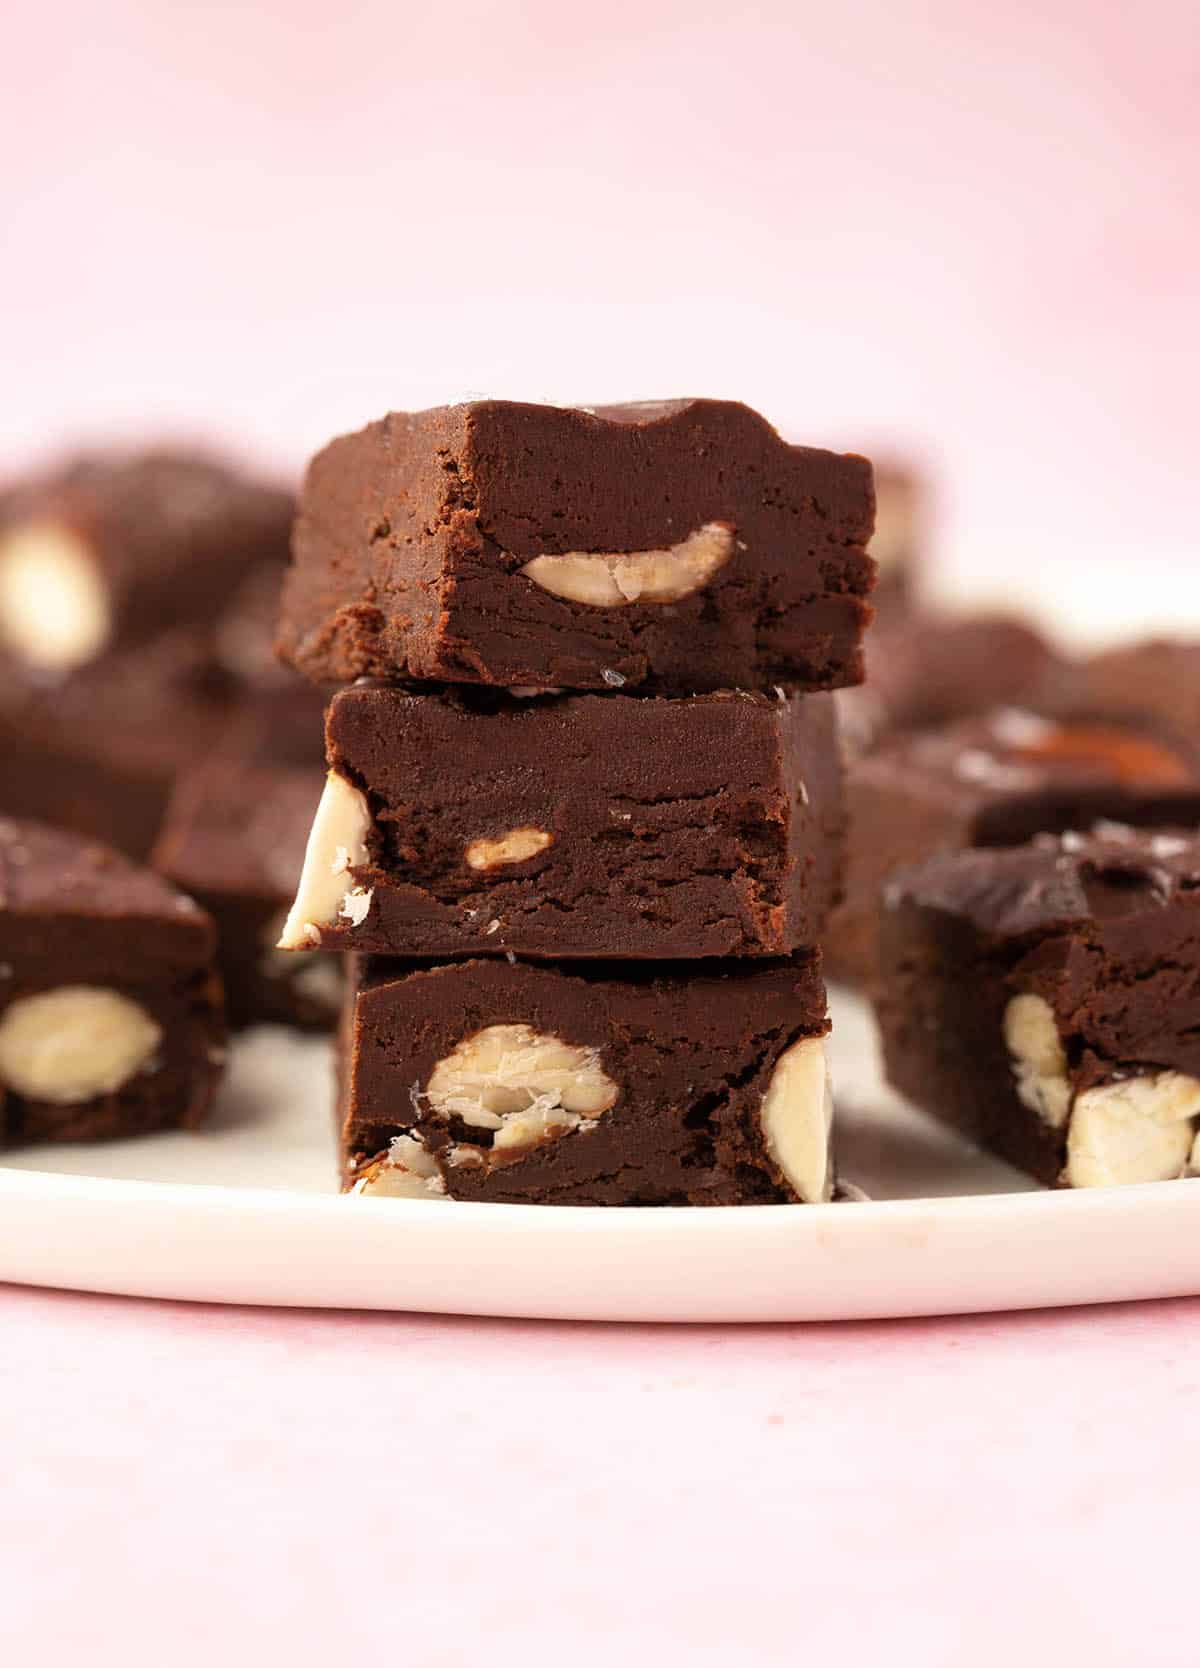 A stack of Chocolate Almond Fudge on a white plate.